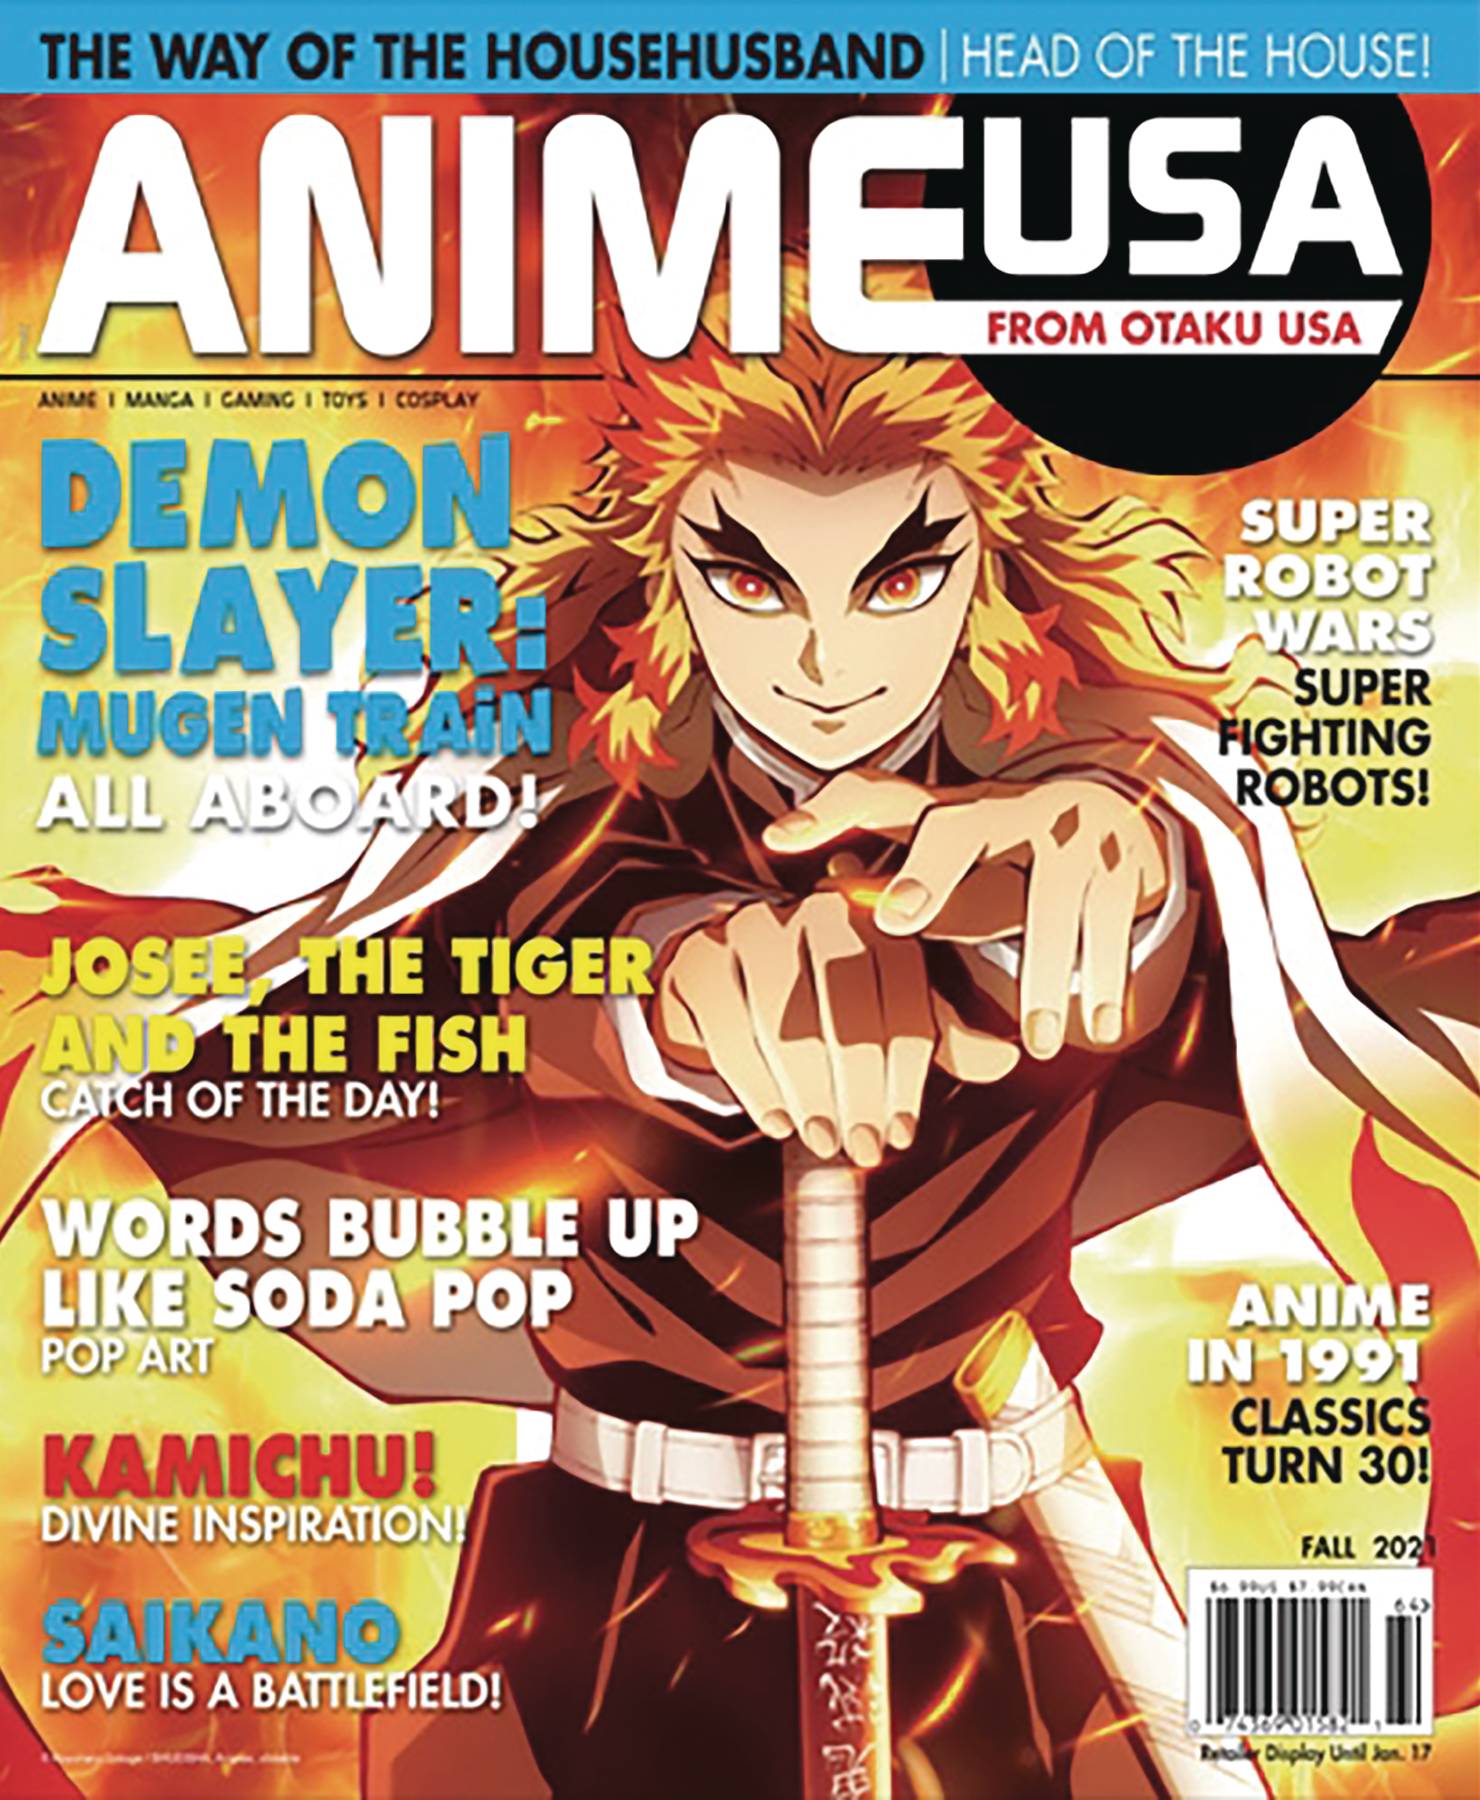 The Historical Case of Anime in the USA — The Black Case Diaries